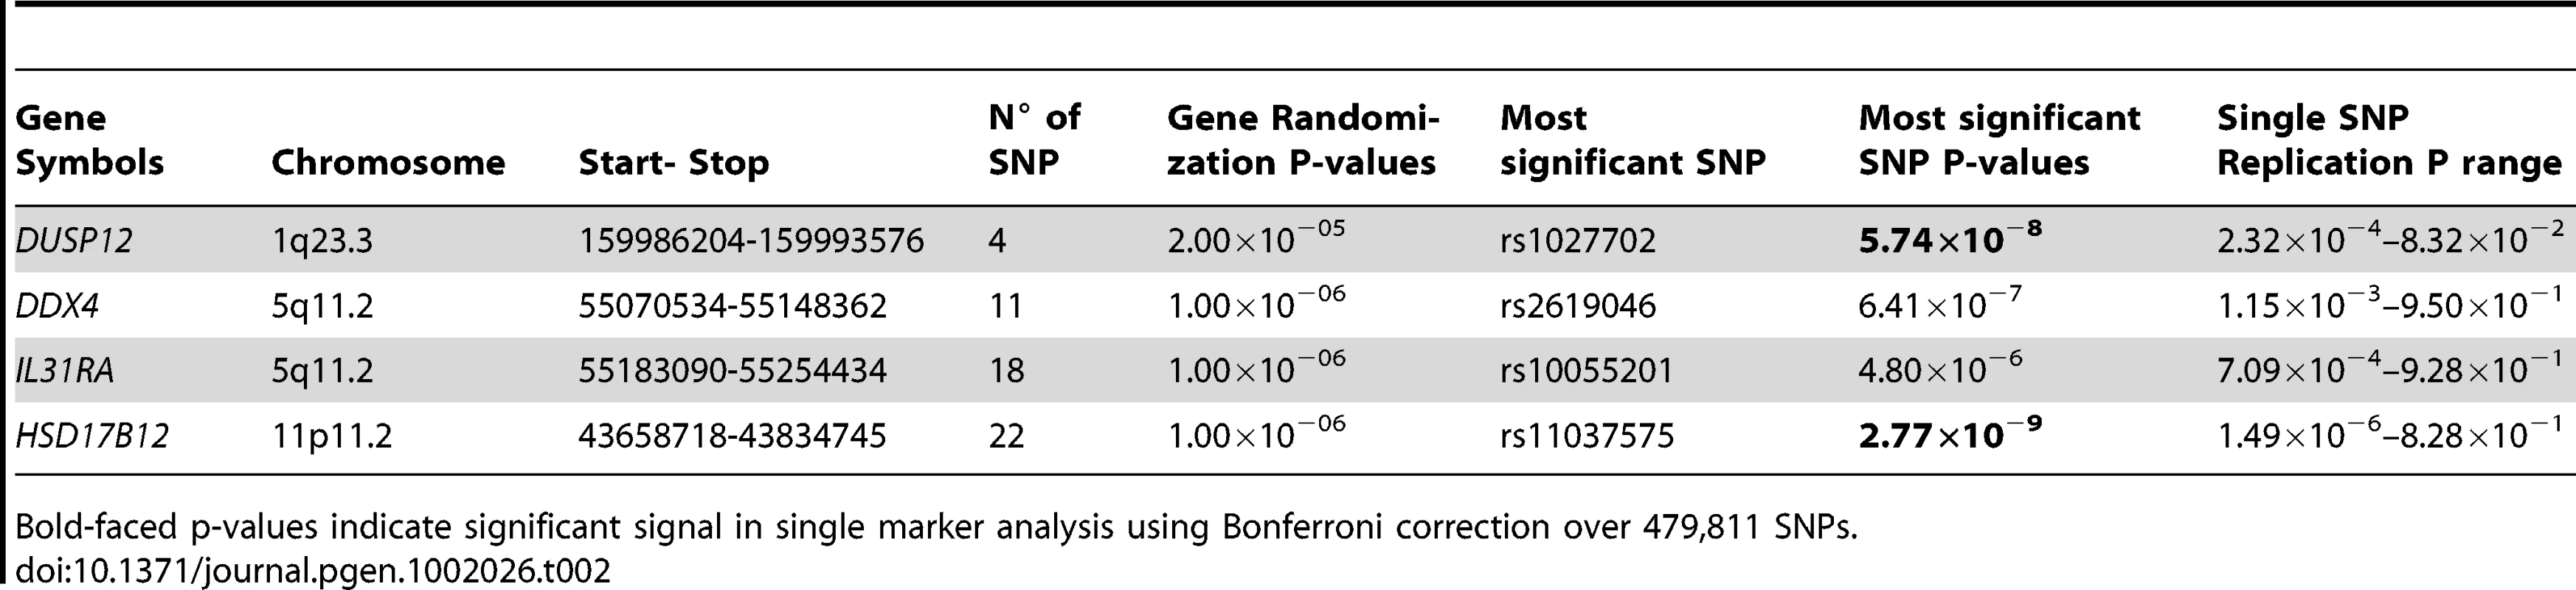 Additional summaries of gene-centric analysis results for low-risk neuroblastoma.